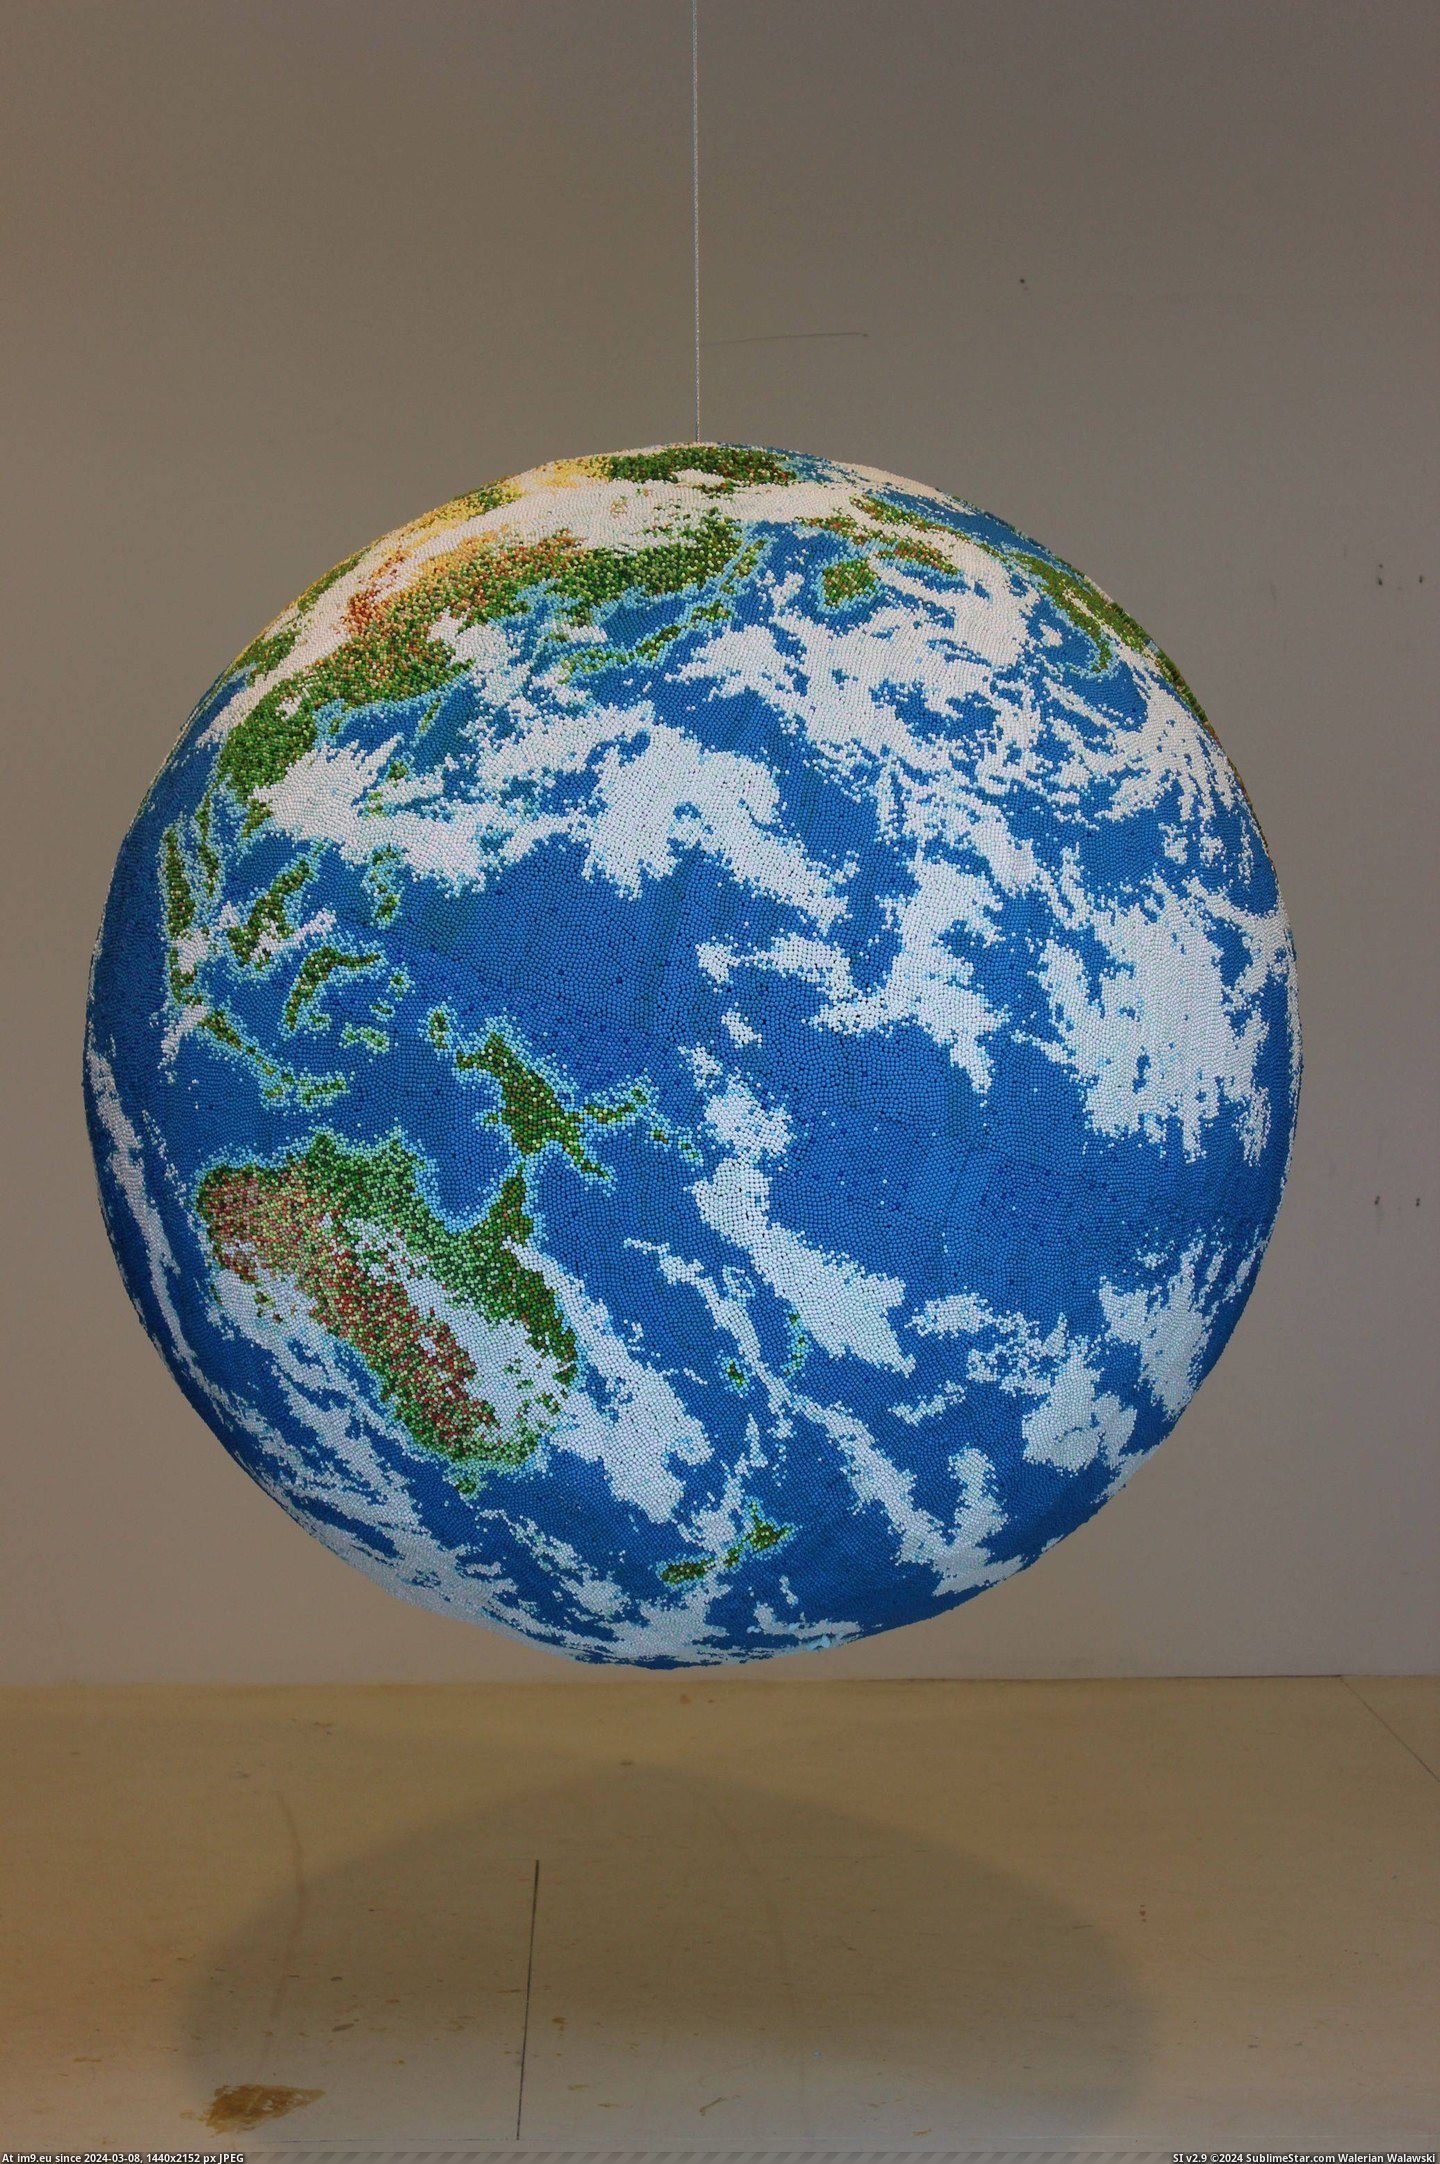 #Years #Making #Globe #Matches #Sculptor #Dad #Spent [Pics] My dad is a sculptor and has spent 2 years making this globe made entirely out of matches. 17 Pic. (Image of album My r/PICS favs))